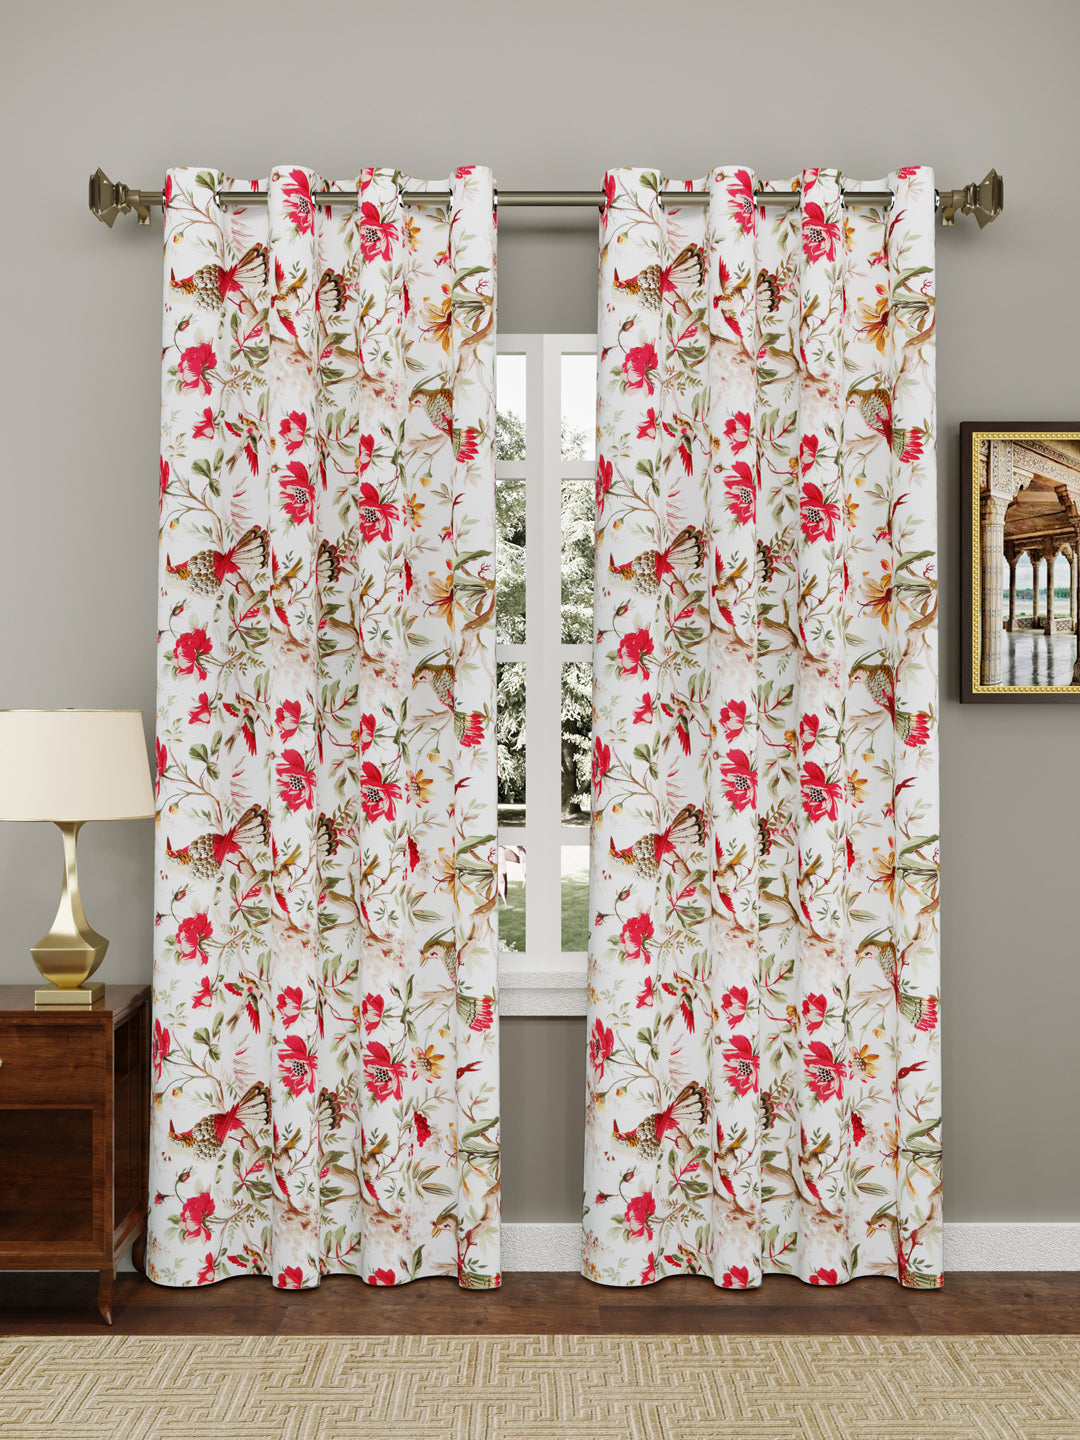 Cotton Curtains Set Of 2, Red Flowers & Birds